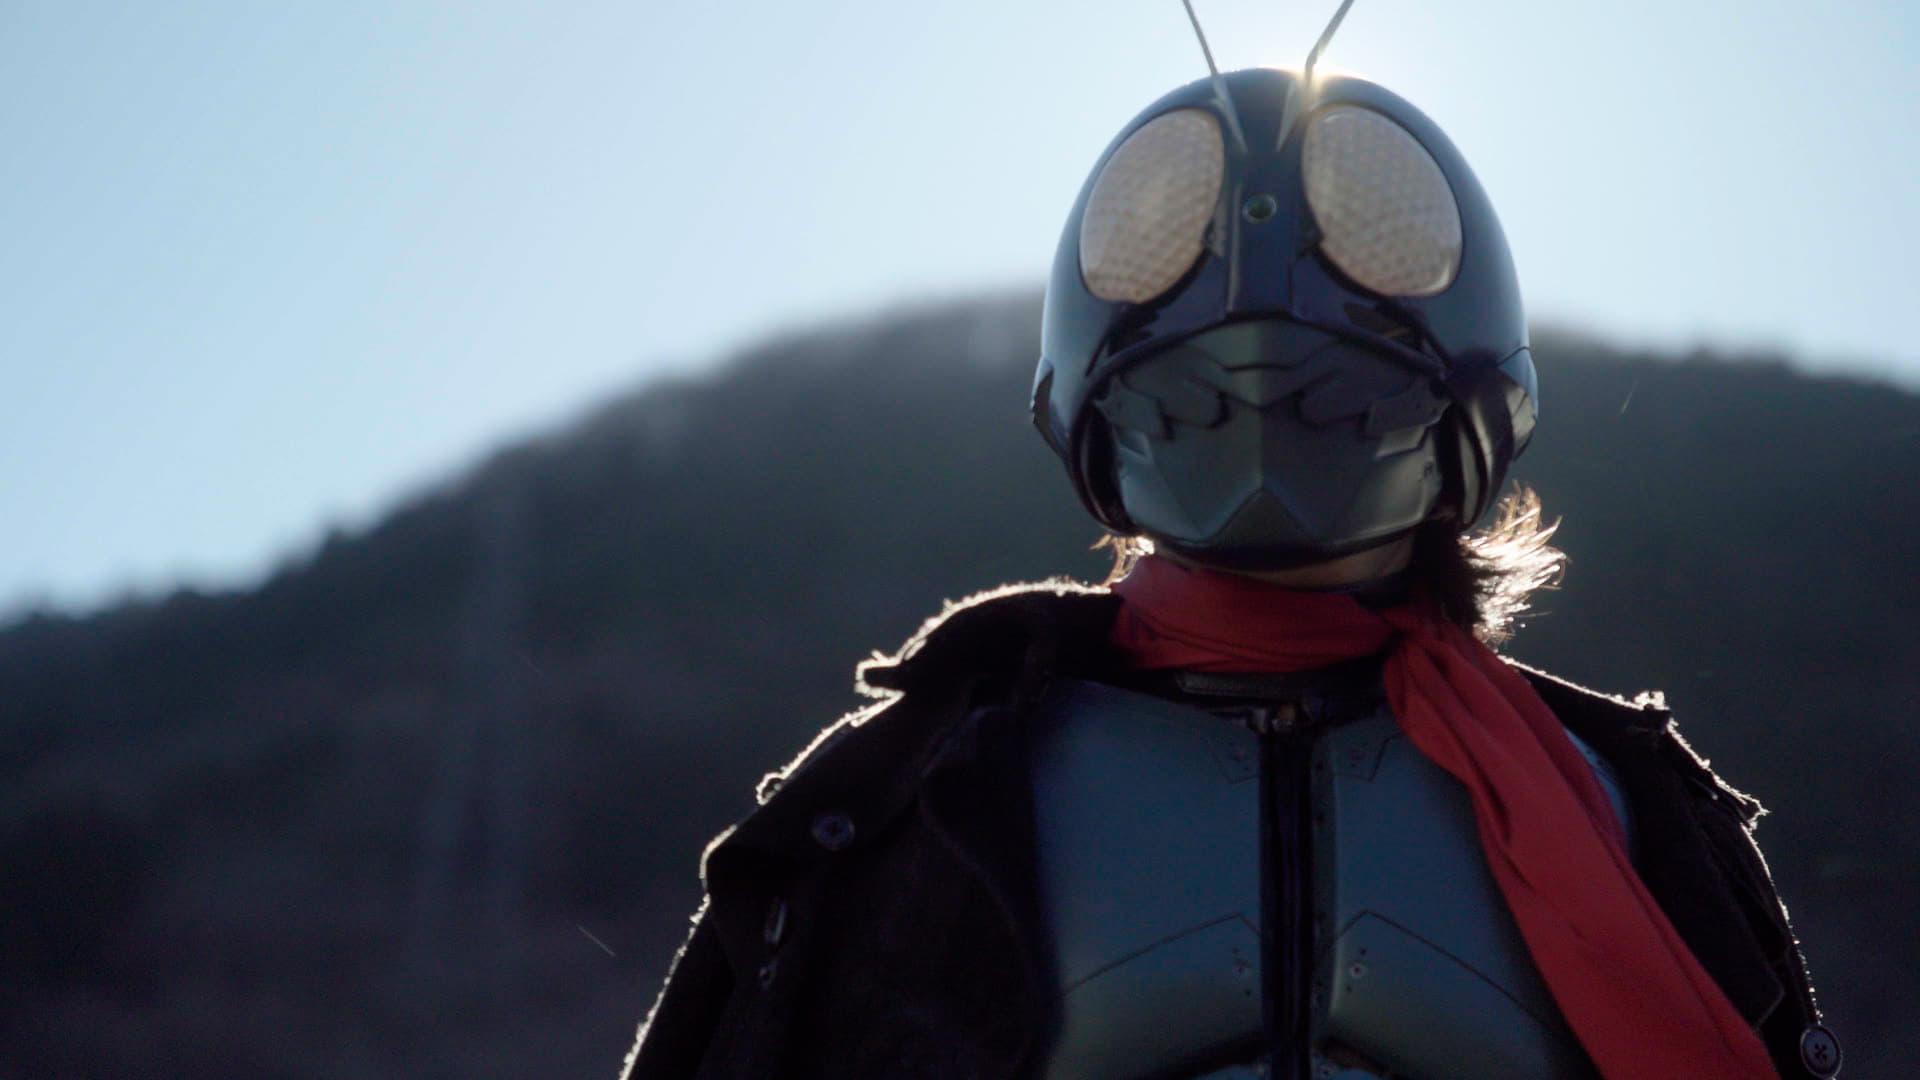 Documentary "Shin Kamen Rider" ~Behind the Scenes of the Hero Action Challenge~ backdrop